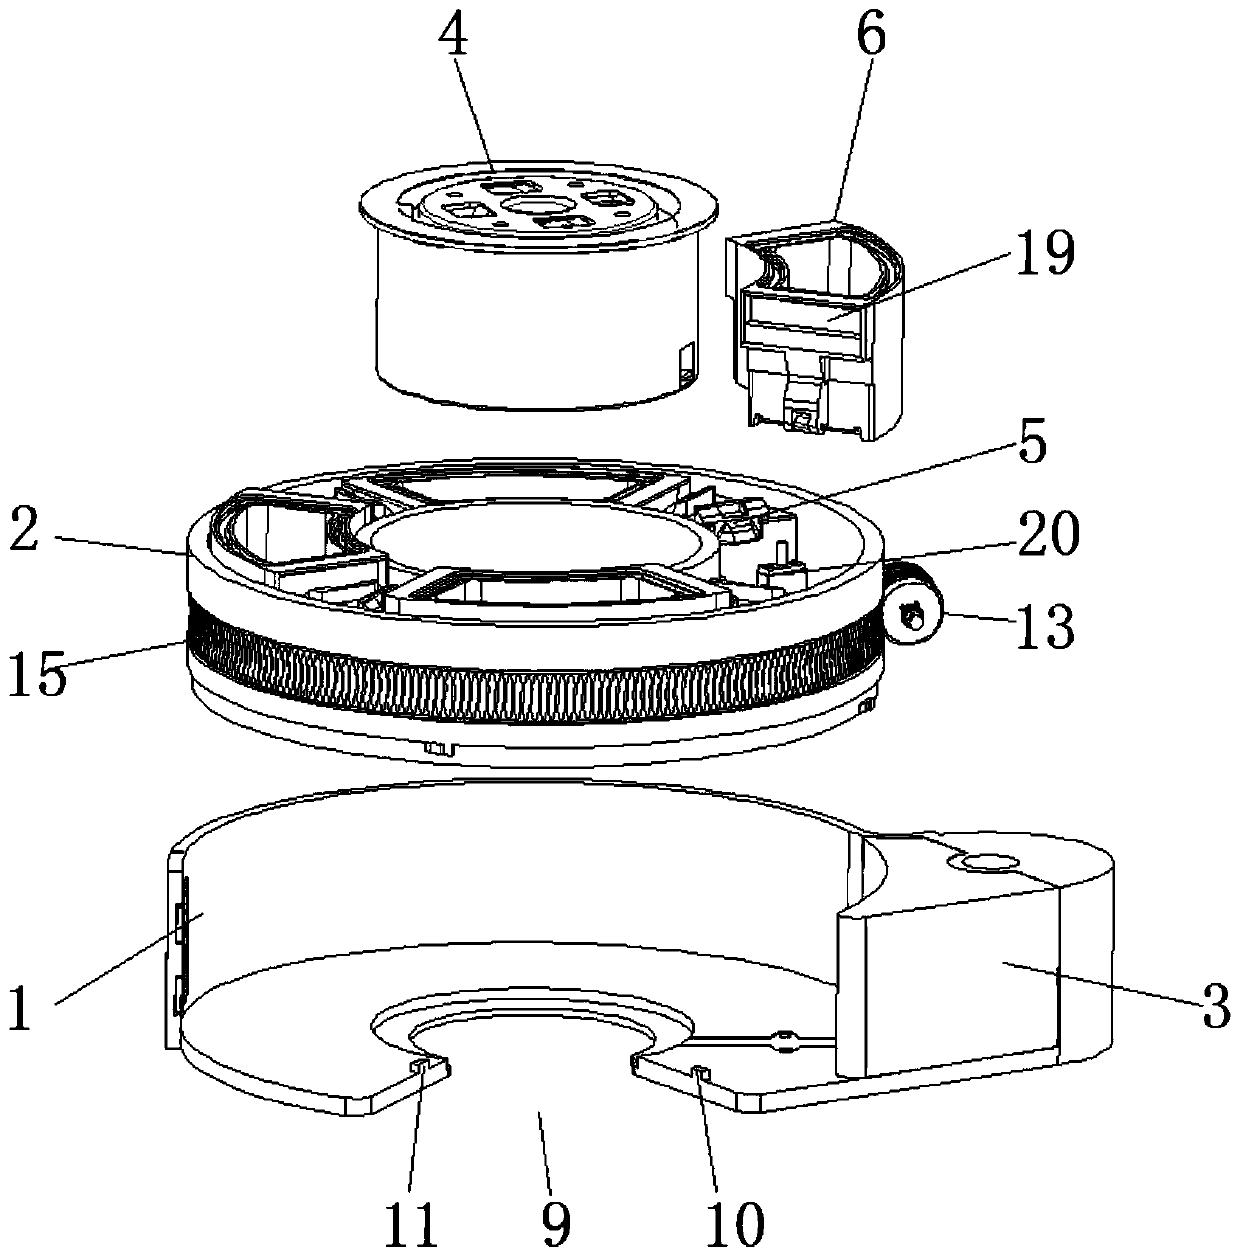 An automatic feeding device for food